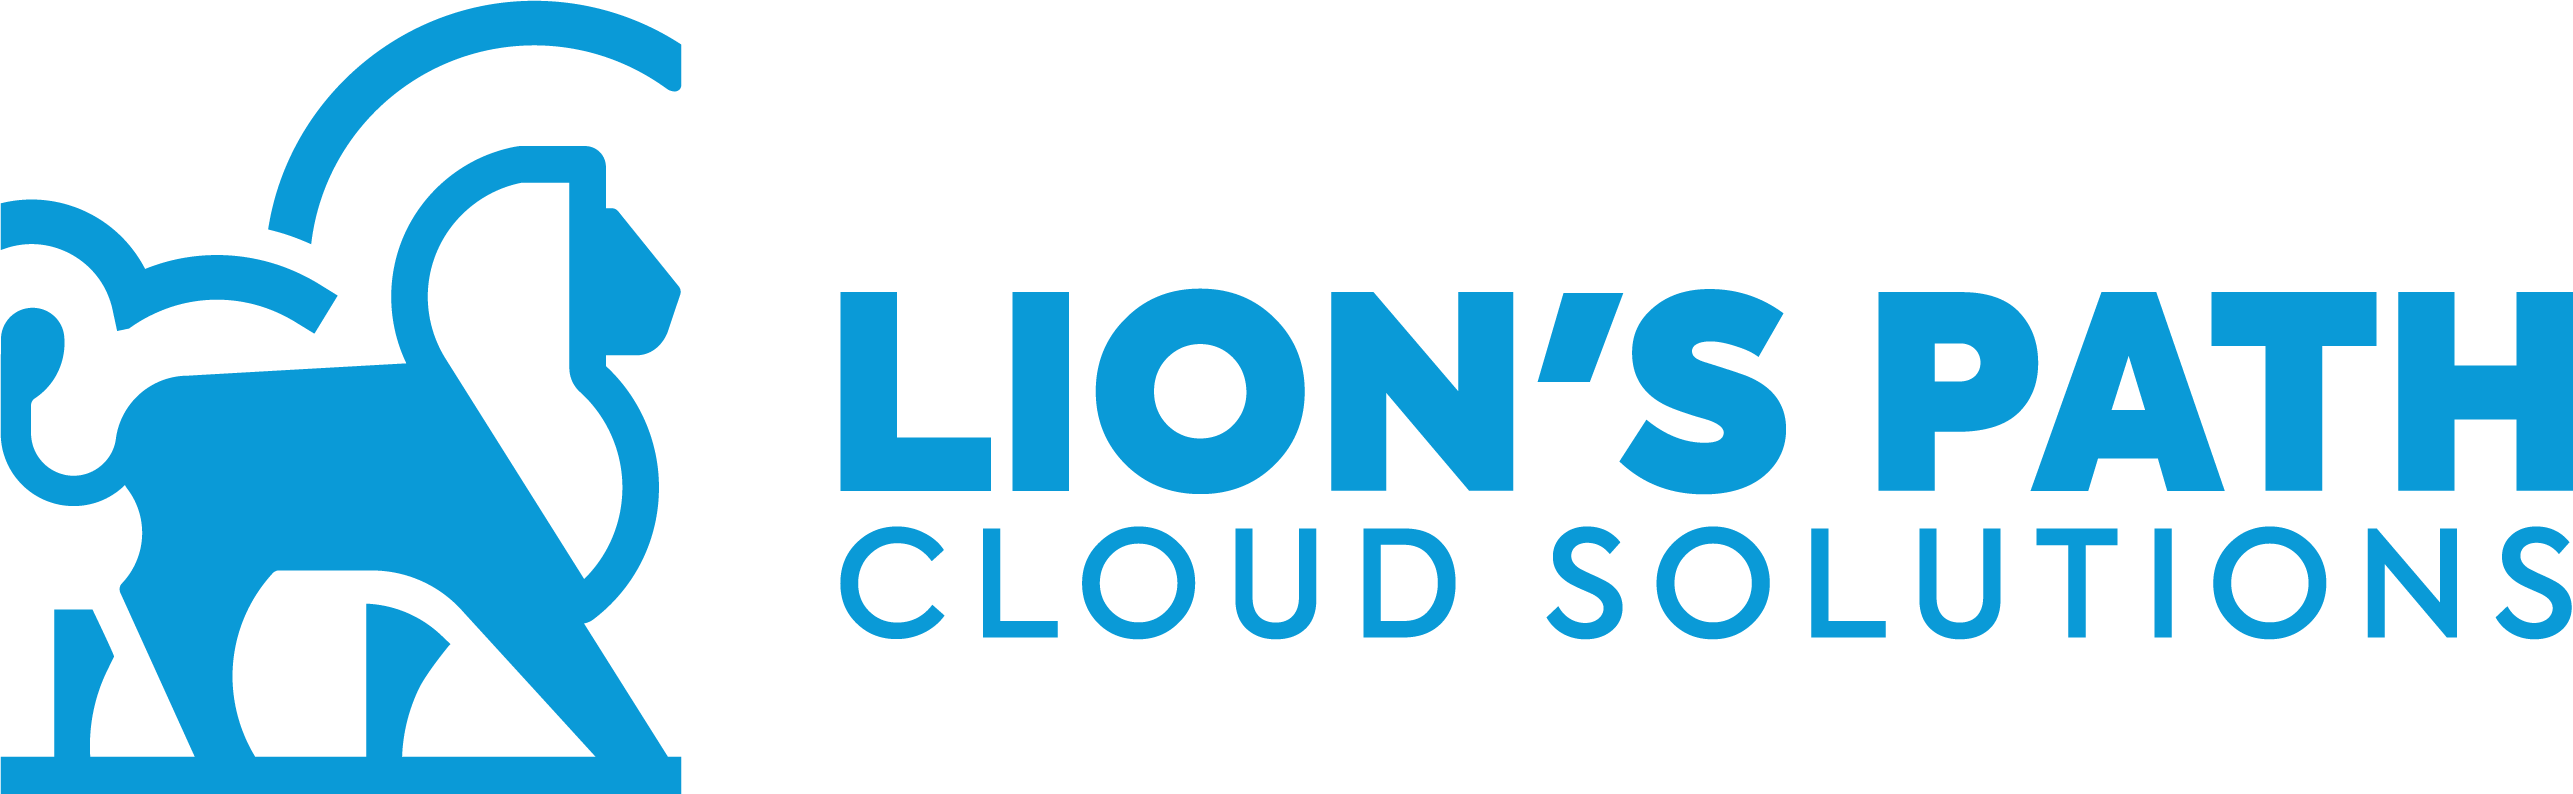 The site's logo followed by 'Lion's Path Cloud Solutions'